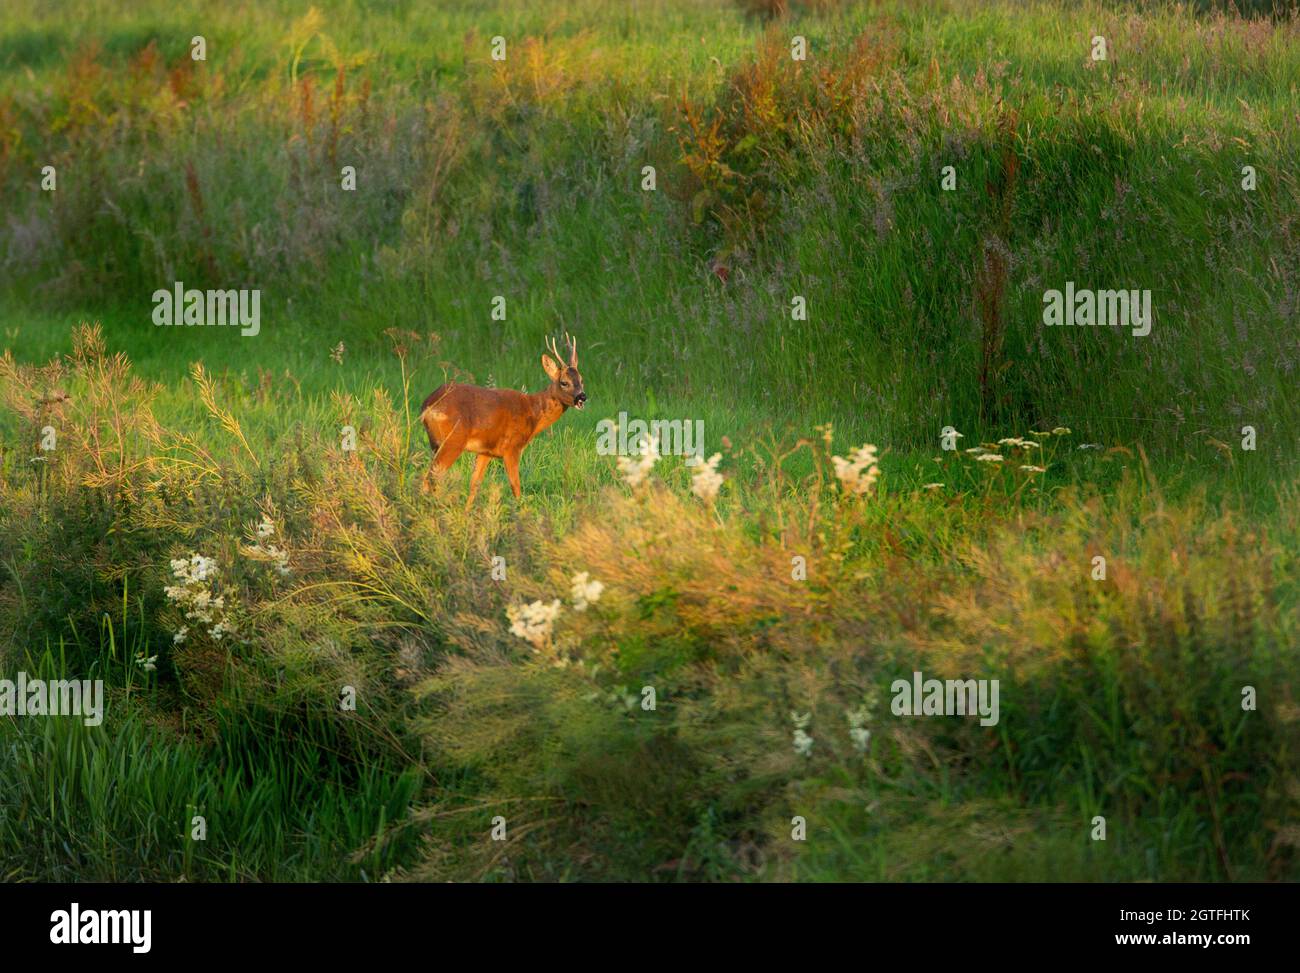 Roe Deer stag grazing in a meadow of long grass and meadowsweet blossoms Stock Photo